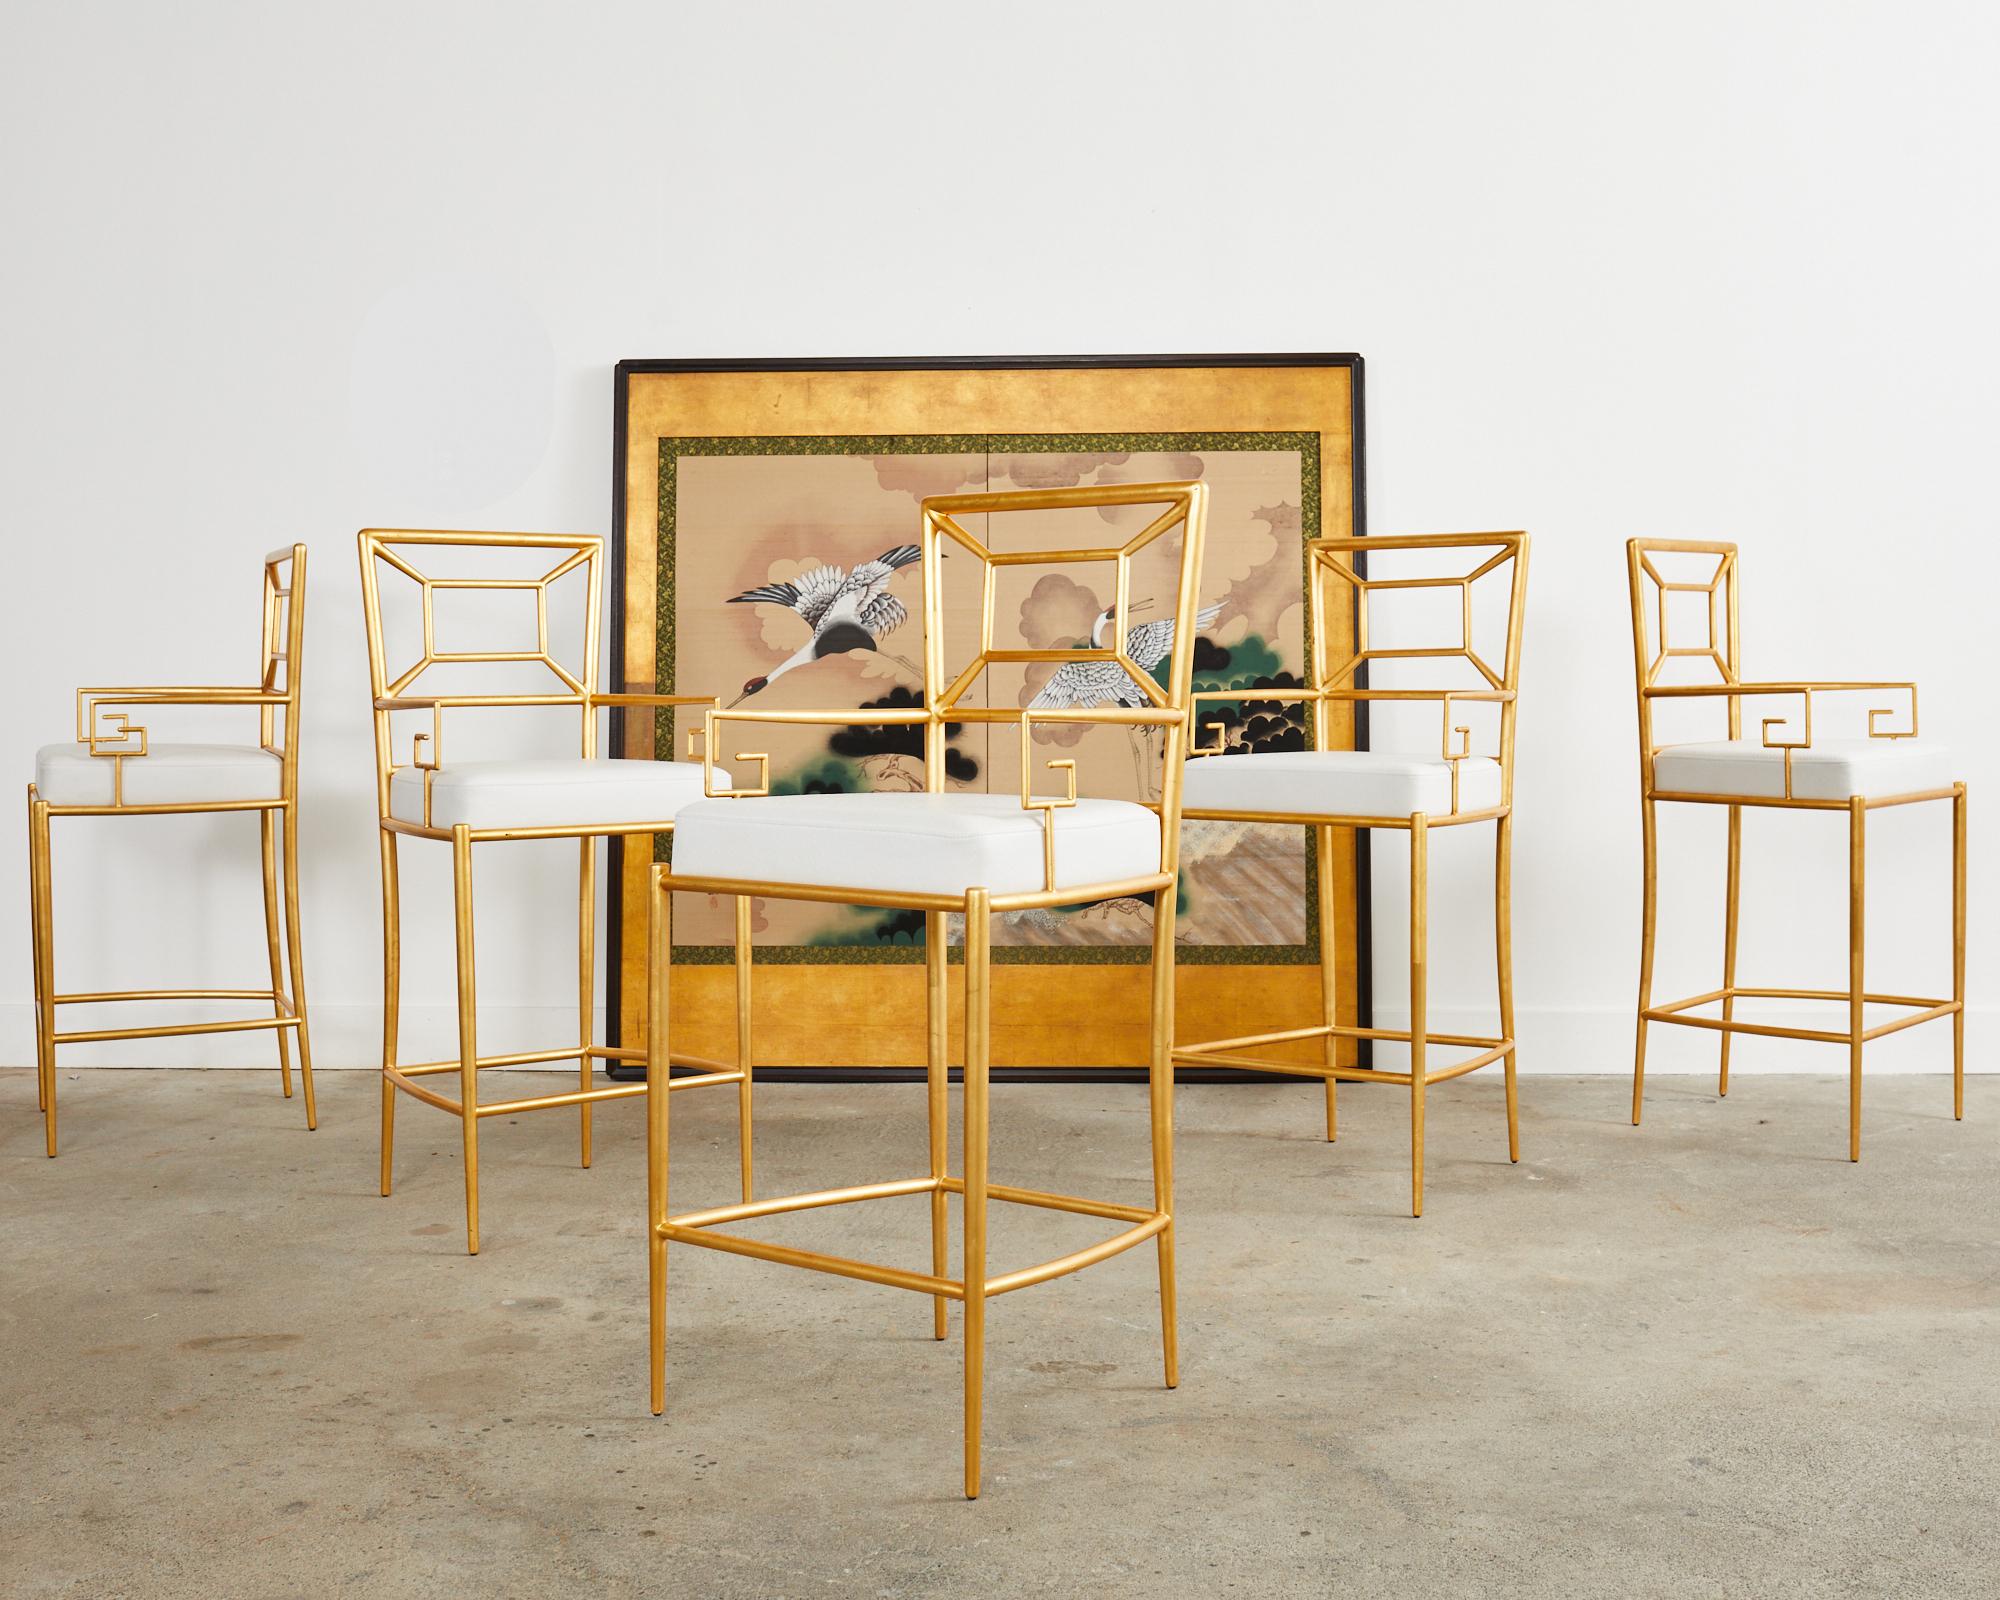 Glamorous set of five barstools by iconic furniture maker Century Furniture. The stools feature a metal frame covered with squares of gold leaf. The bar height frame has a square back and generous seat upholstered with a faux leather ostrich design